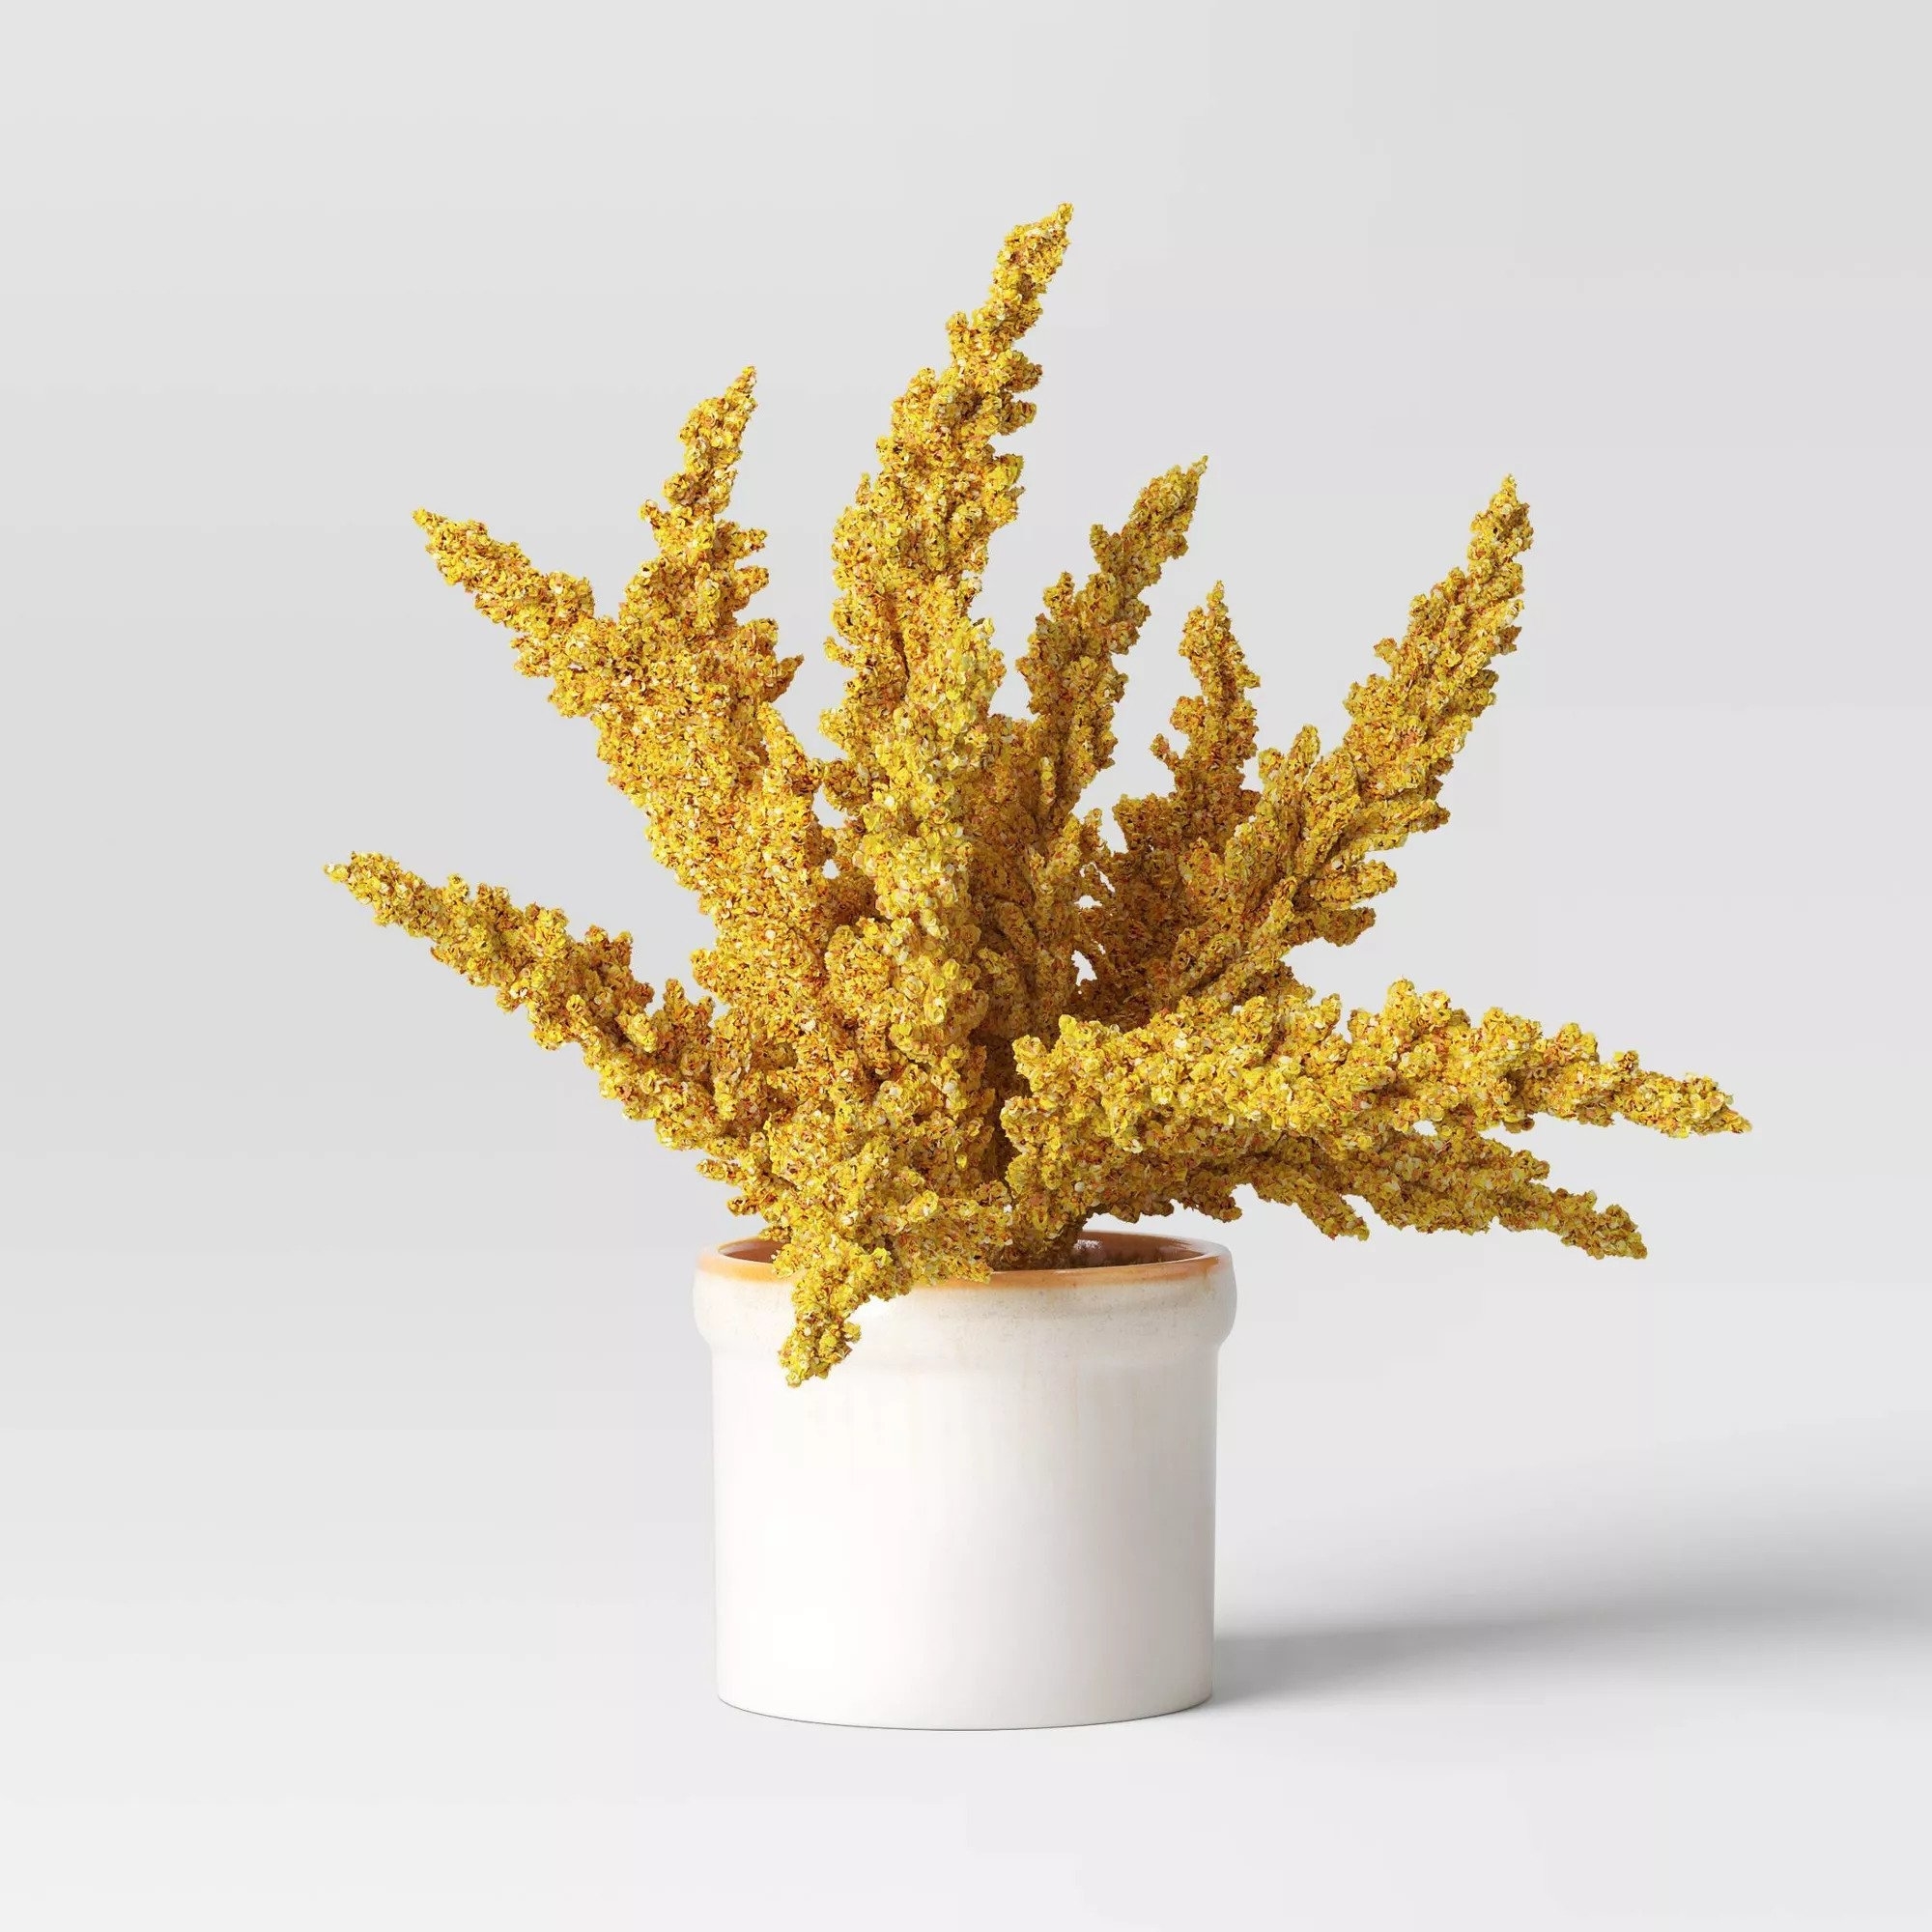 The artificial plant in an off-white ceramic pot